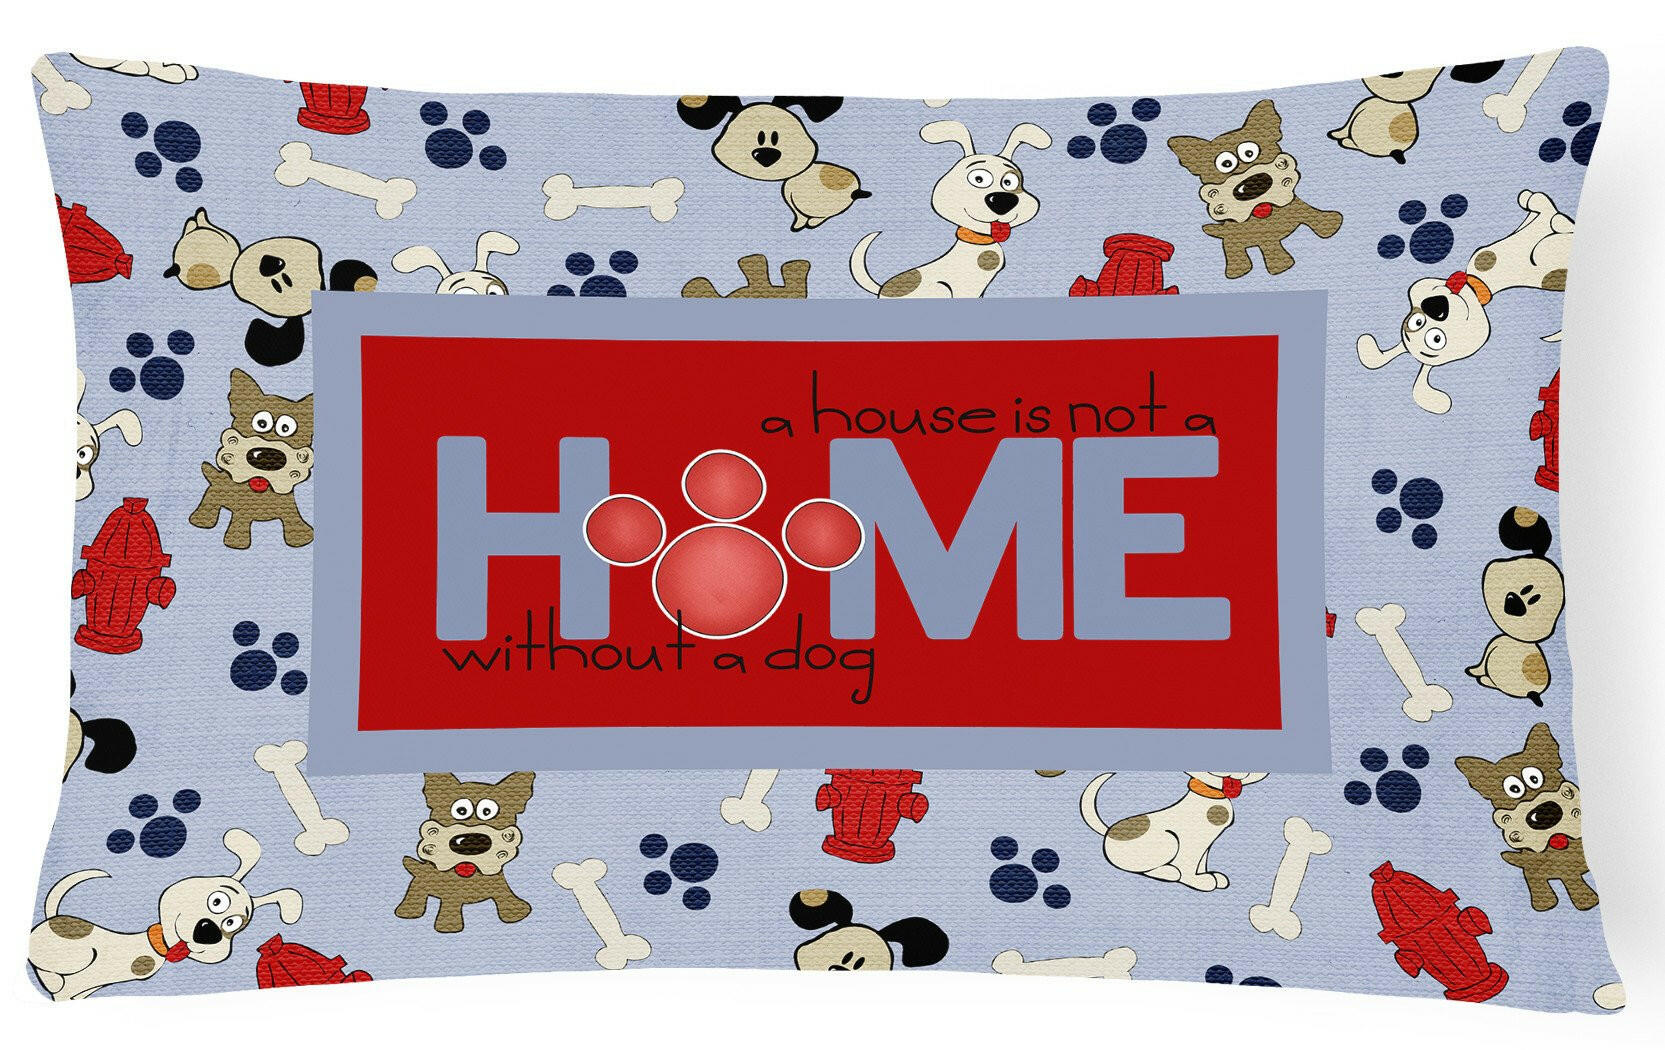 A House is not a home without a dog   Canvas Fabric Decorative Pillow SB3052PW1216 by Caroline's Treasures